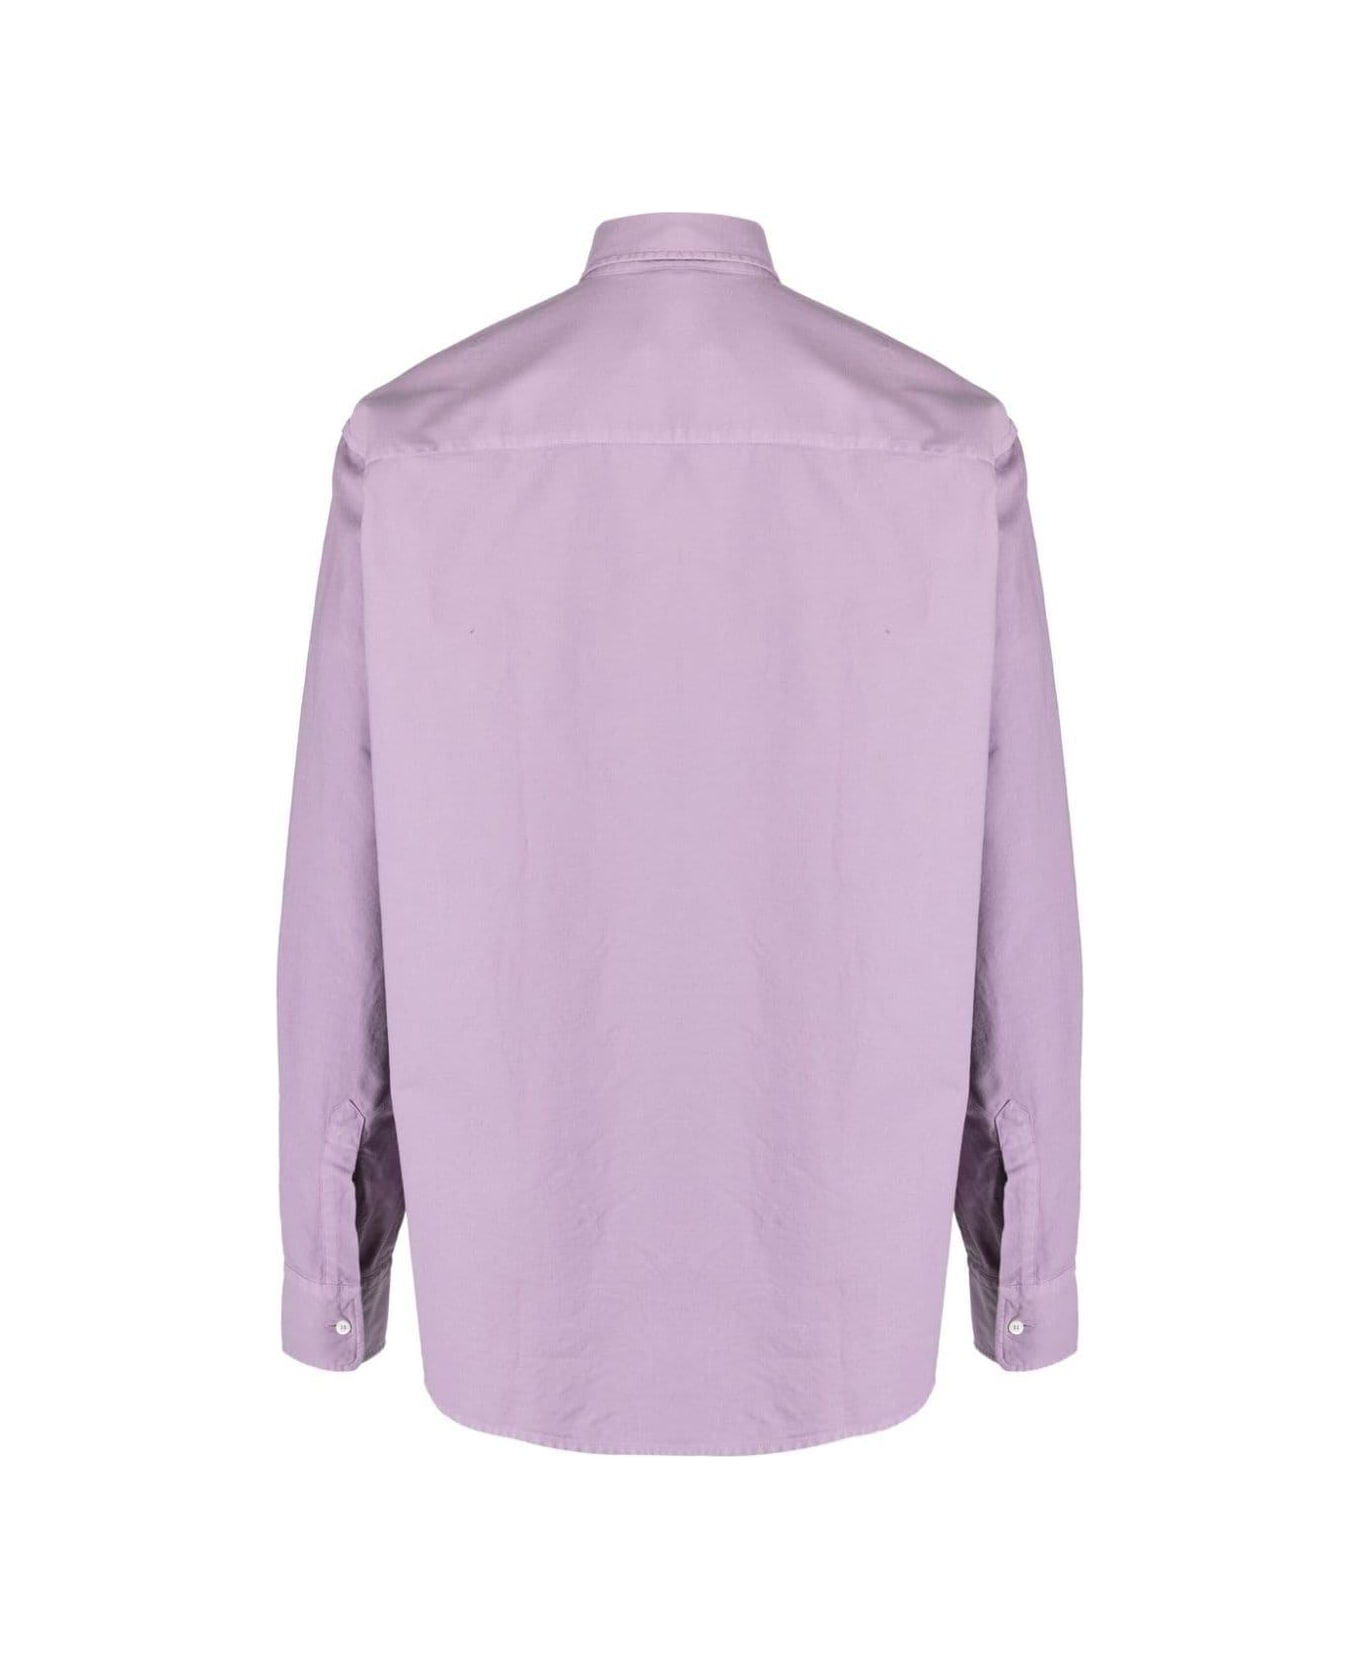 Aspesi Collared Buttoned Shirt - Lilac シャツ